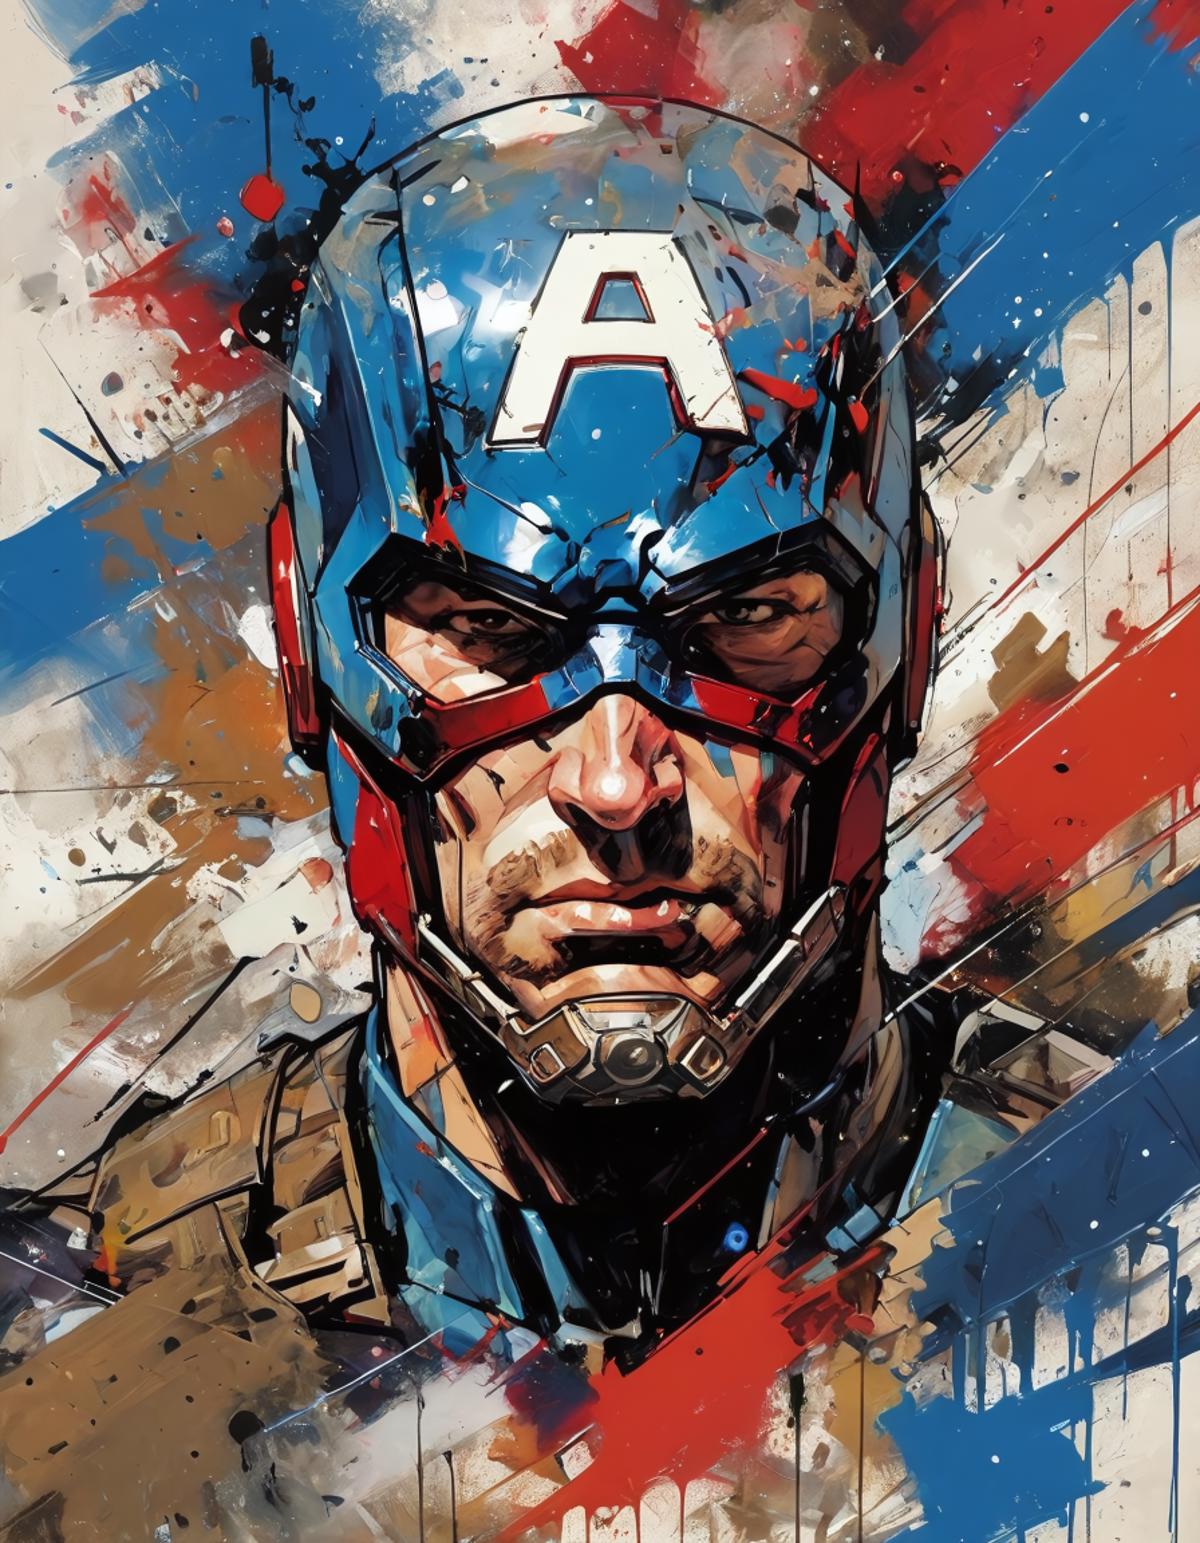 A Marvel Comics Poster of Captain America with a Red, White, and Blue Background.